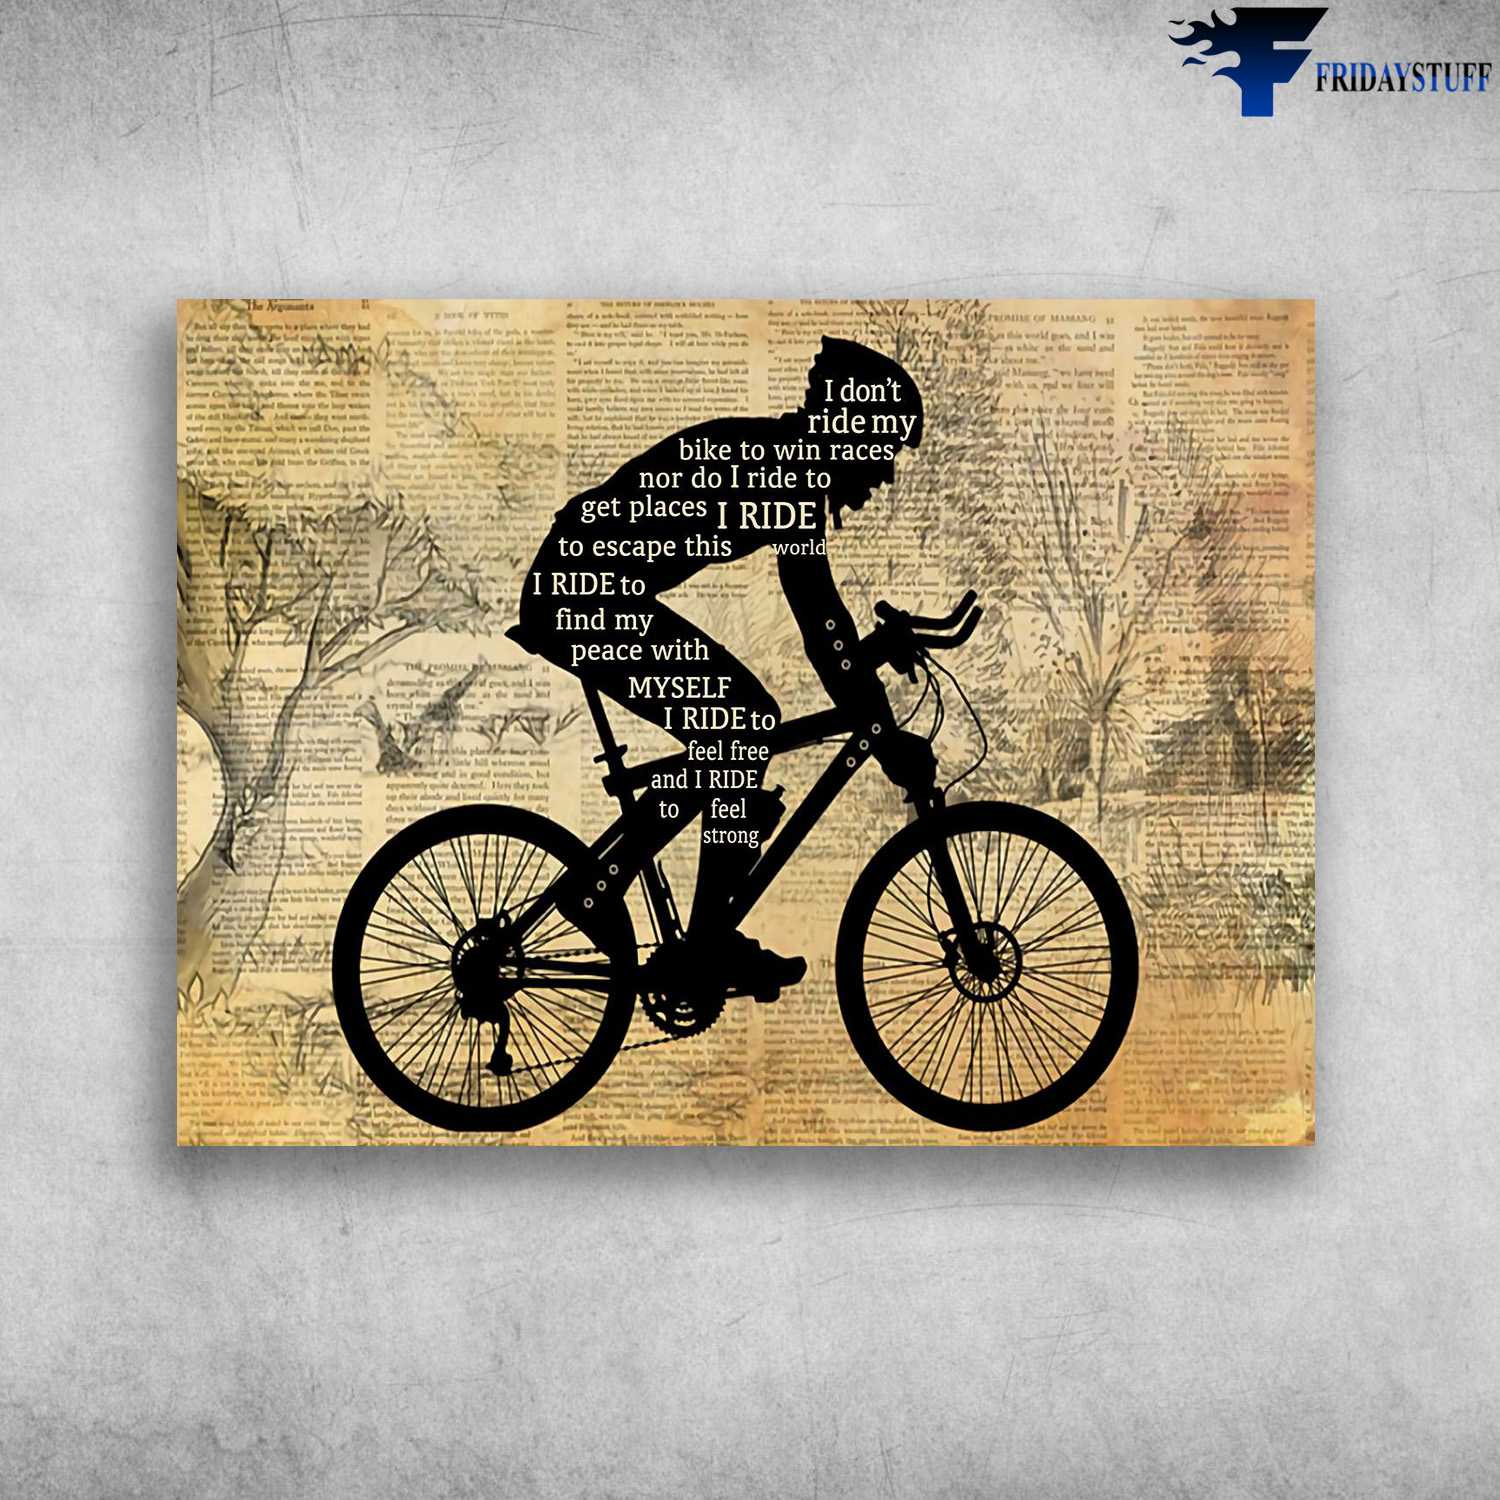 Cycling Man, Biker Poster - I Don't Ride My Bike To Win Races, Nor Do I Ride To Get Places, I Ride To Escape This World, I Ride To Find My Peace With Myself,